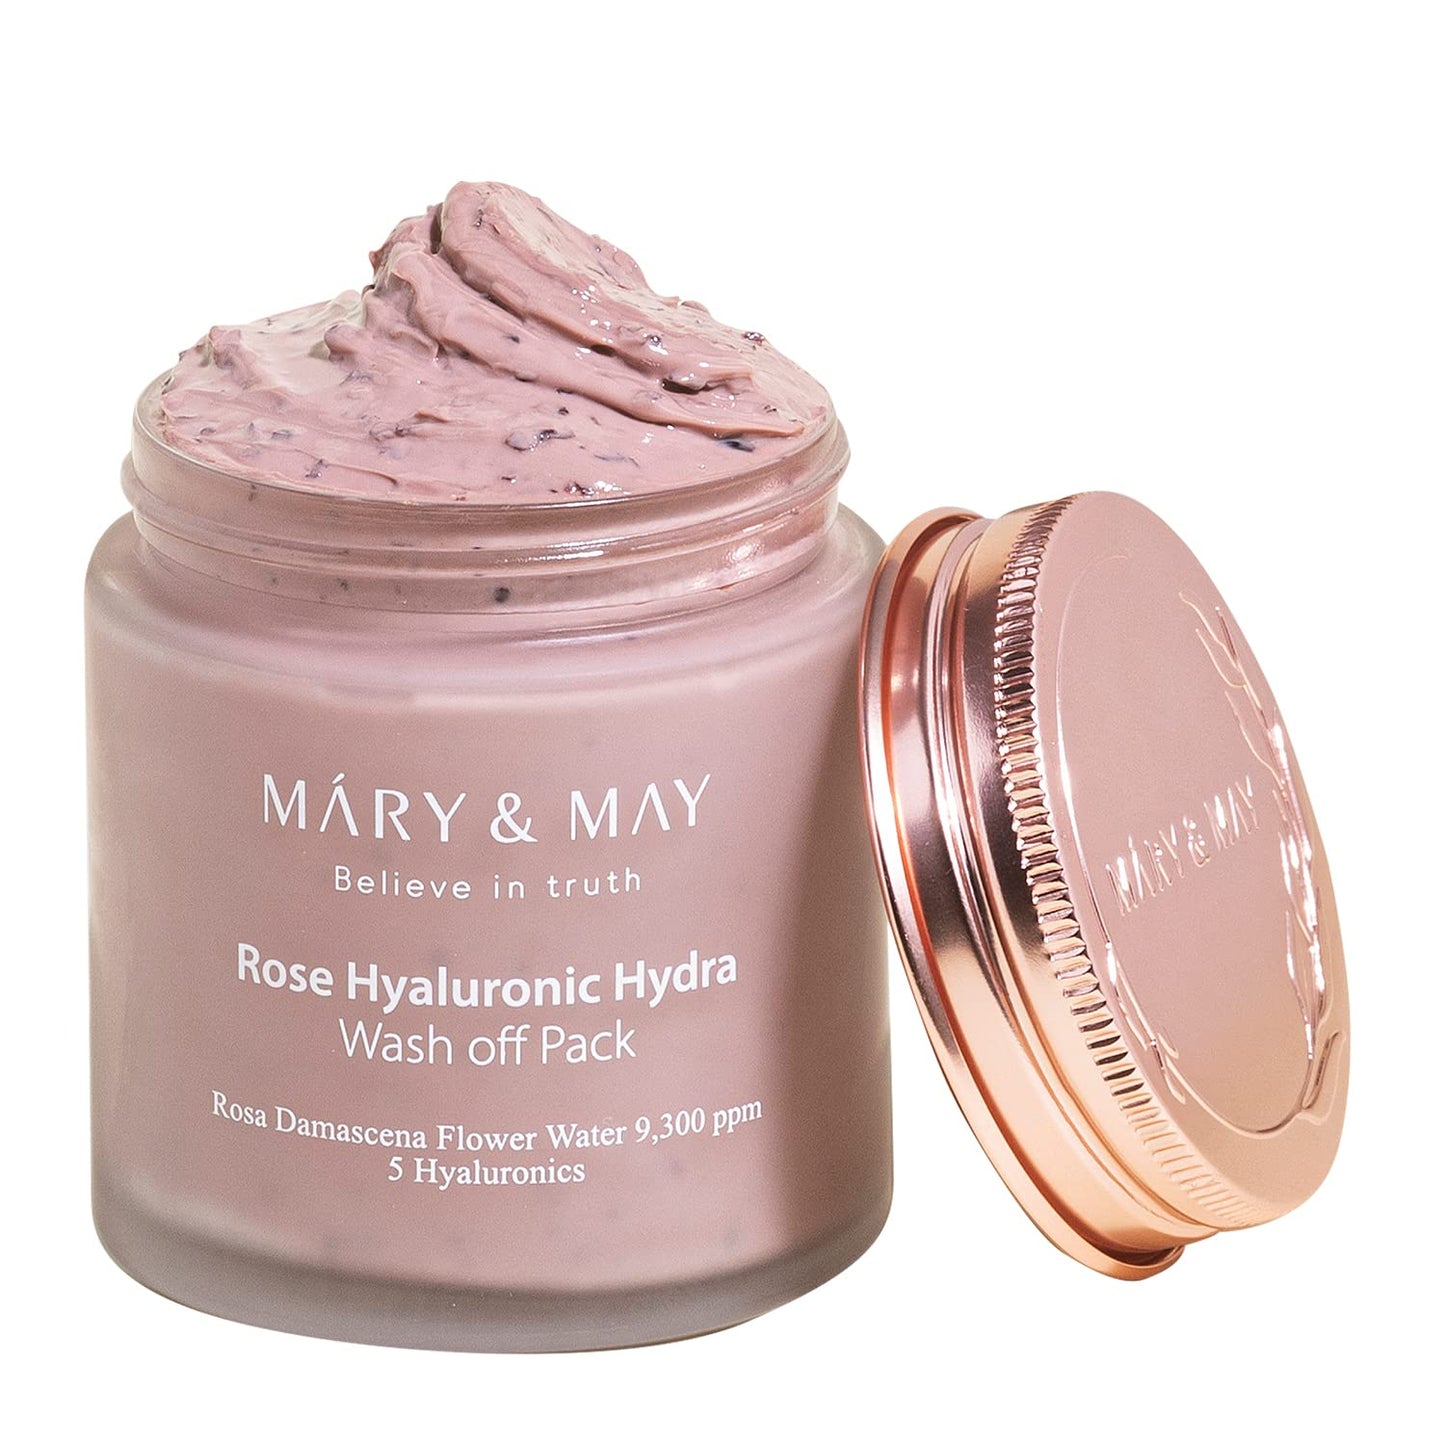 Mary & May Rose Hyaluronic Hydra Wash Off Mask 125g